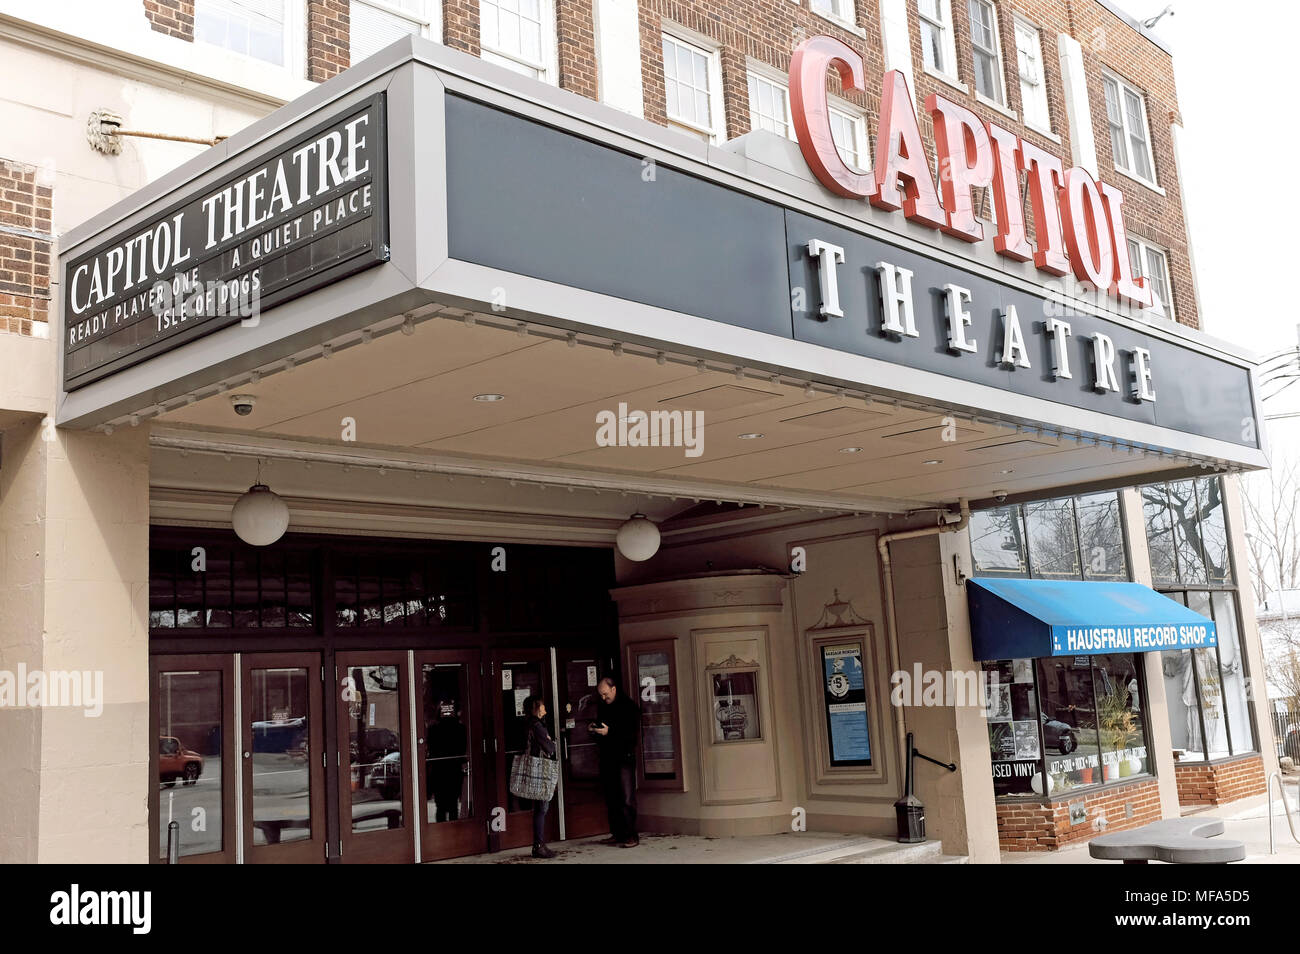 Old Movie Theater Marquee High Resolution Stock Photography And Images - Alamy